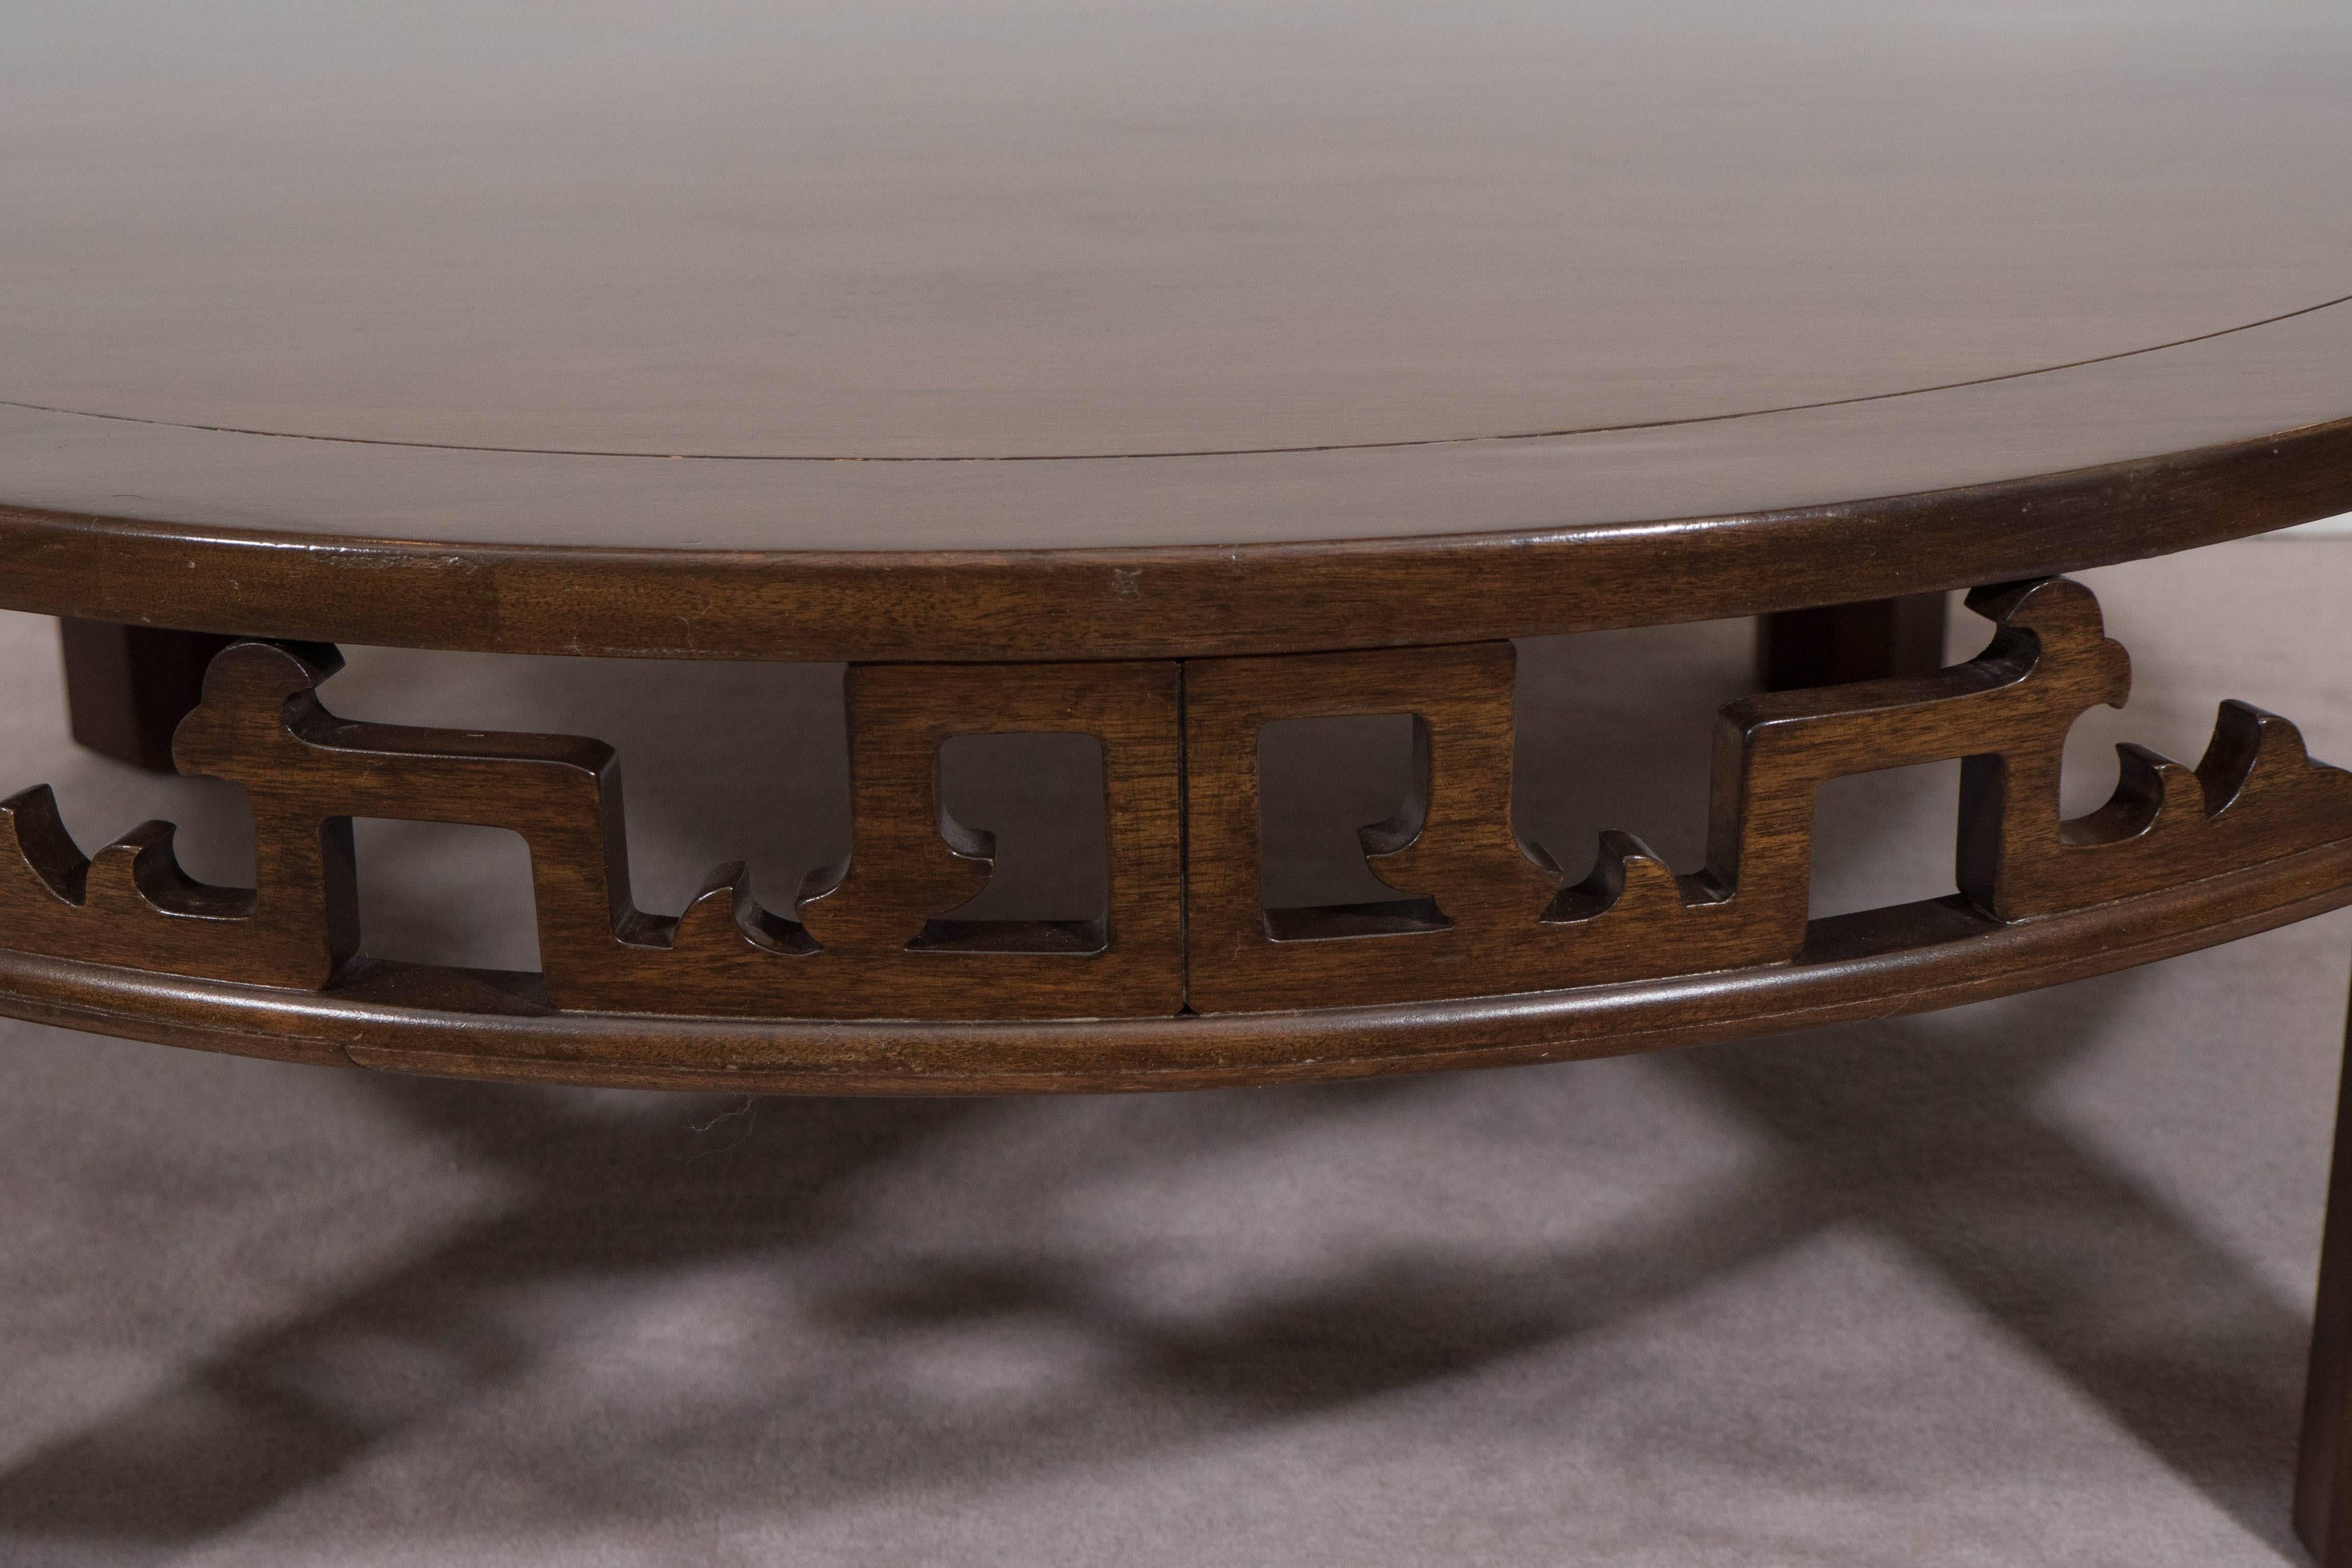 A round 1960s wood coffee table by Baker Furniture, with elaborate open fretwork apron. Markings include [Baker Furniture] plaque to the underside of the table. Despite some surface scratches and age appropriate wear to the table, it remains in very